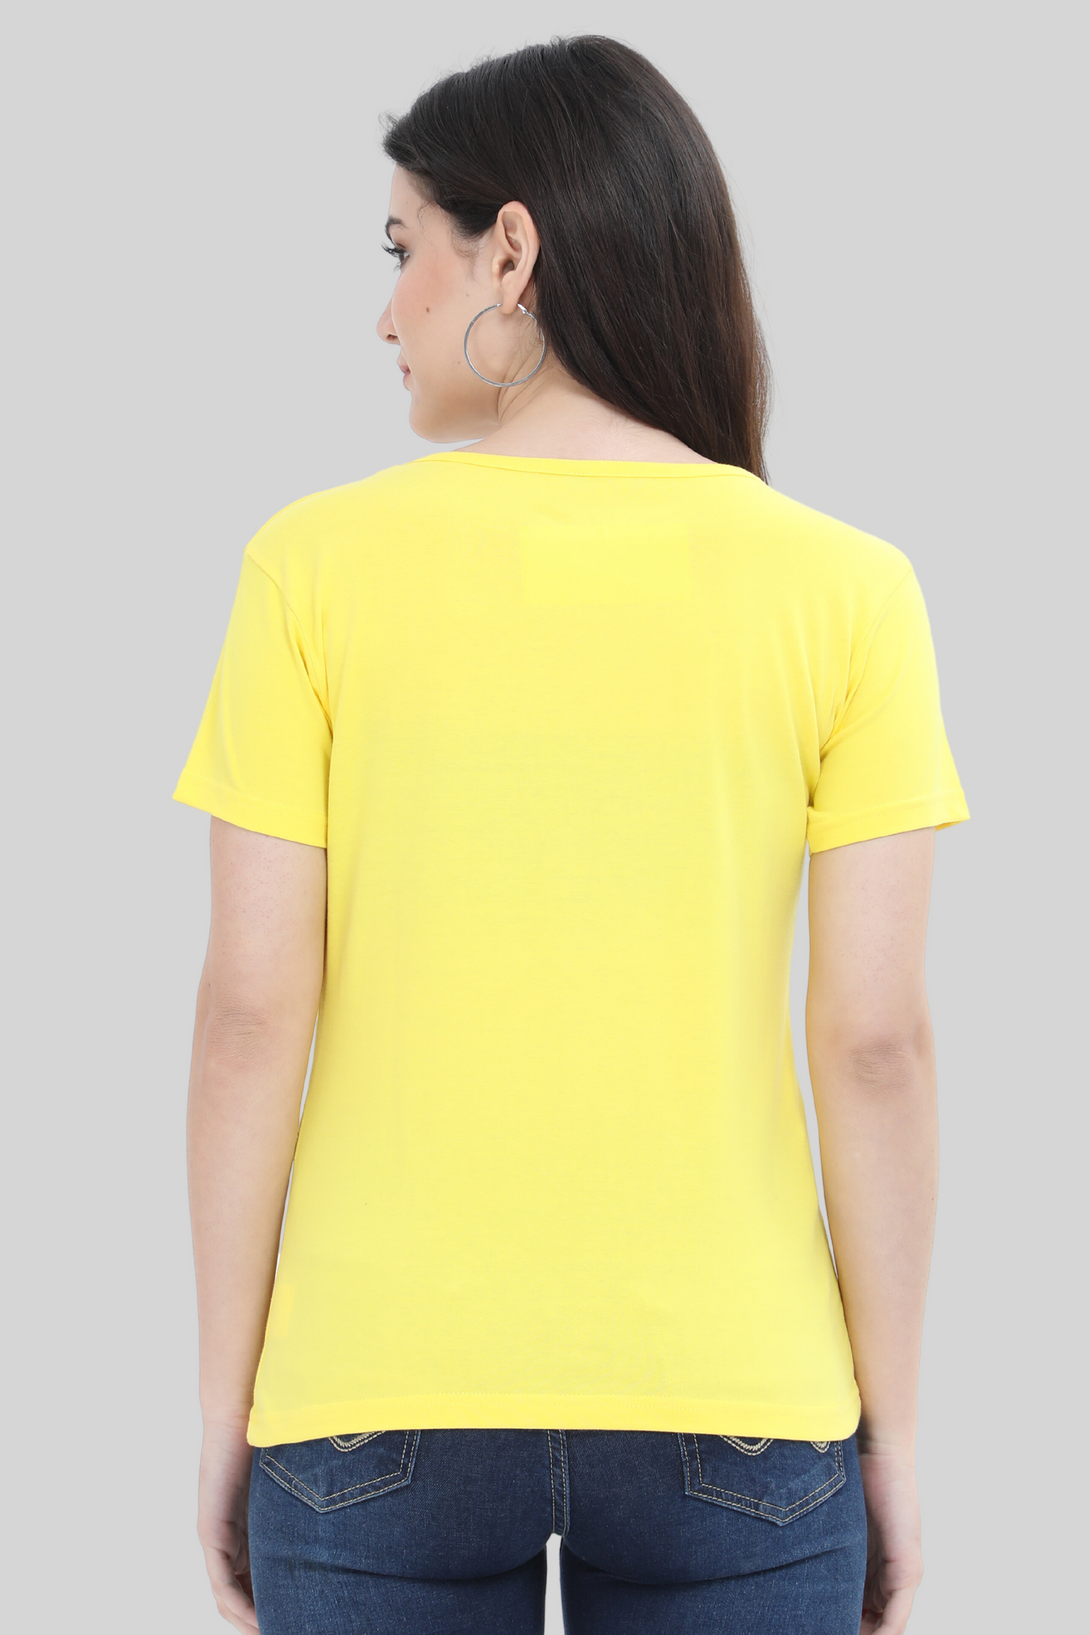 Bright Yellow Scoop Neck T-Shirt For Women - WowWaves - 2